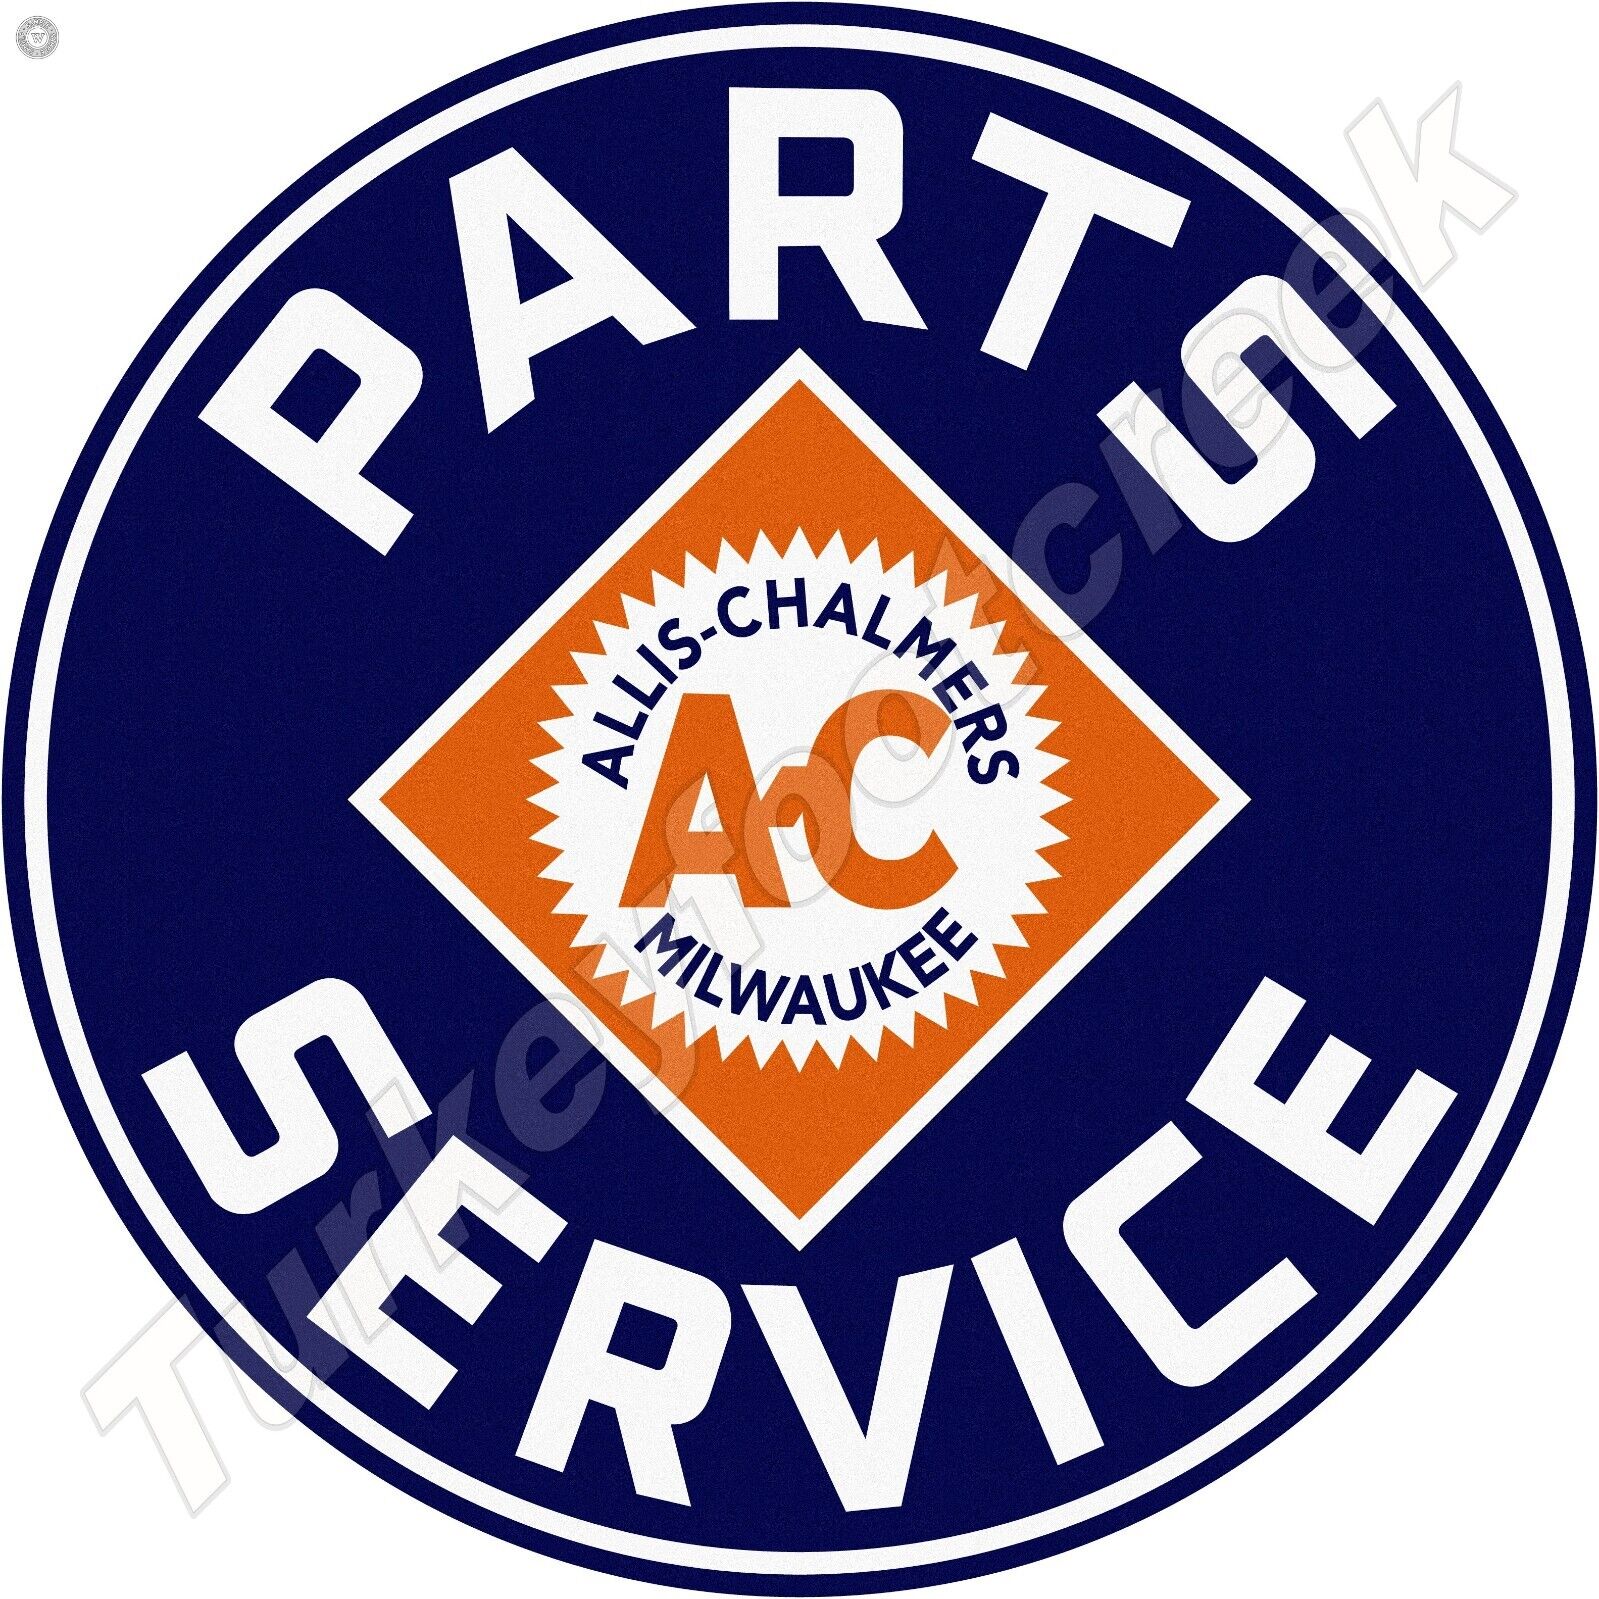 Allis-Chalmers Milwaukee Parts & Service Round Metal Sign 2 Sizes To Choose From